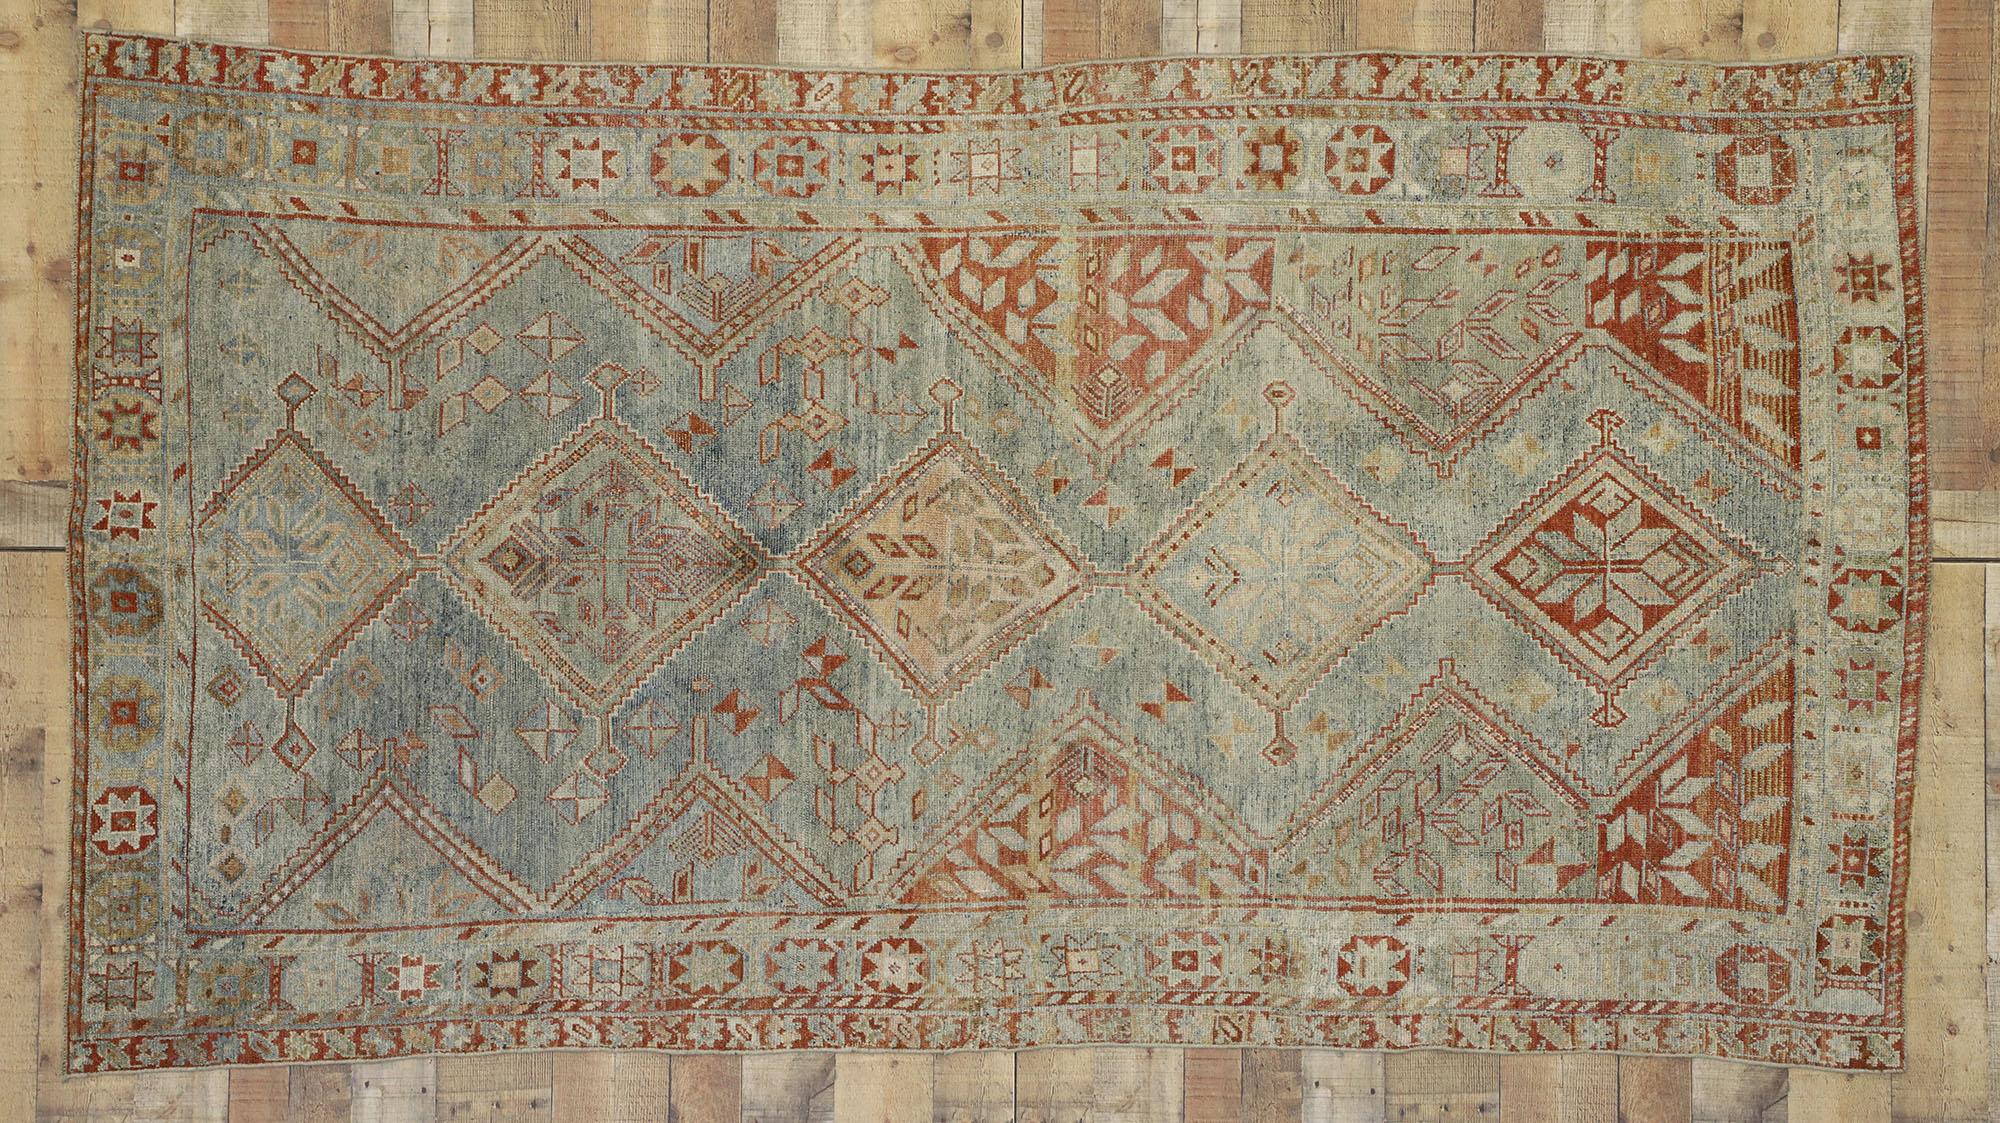 Hand-Knotted Antique Persian Shiraz Rug with Faded Earth-Tone Colors